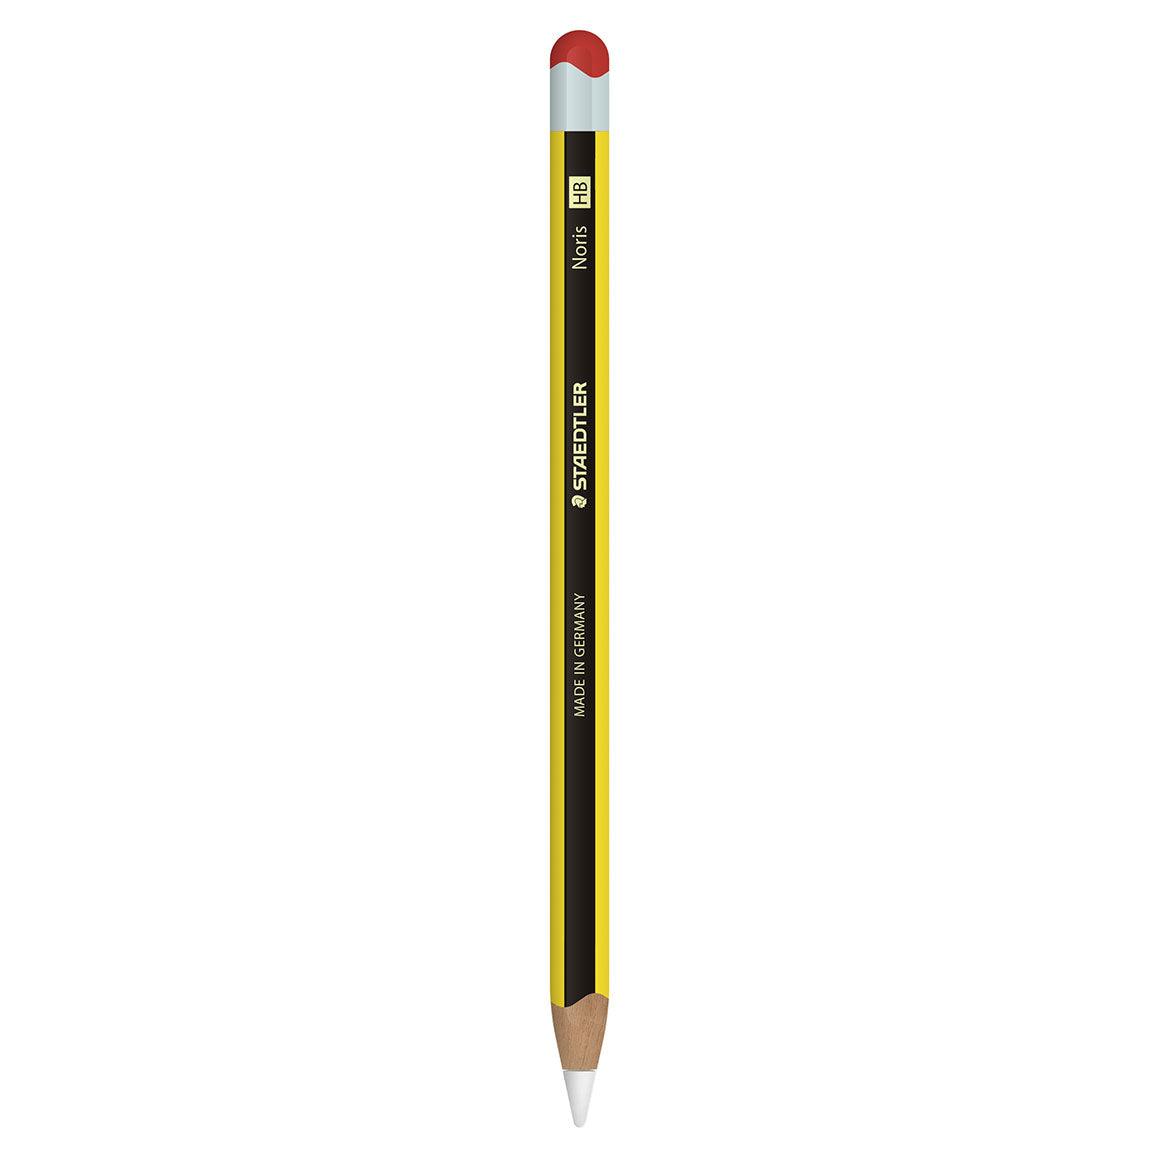 No. 2 Pencil Skin for the Apple Pencil Gen 1 and Gen 2 Options -  Sweden